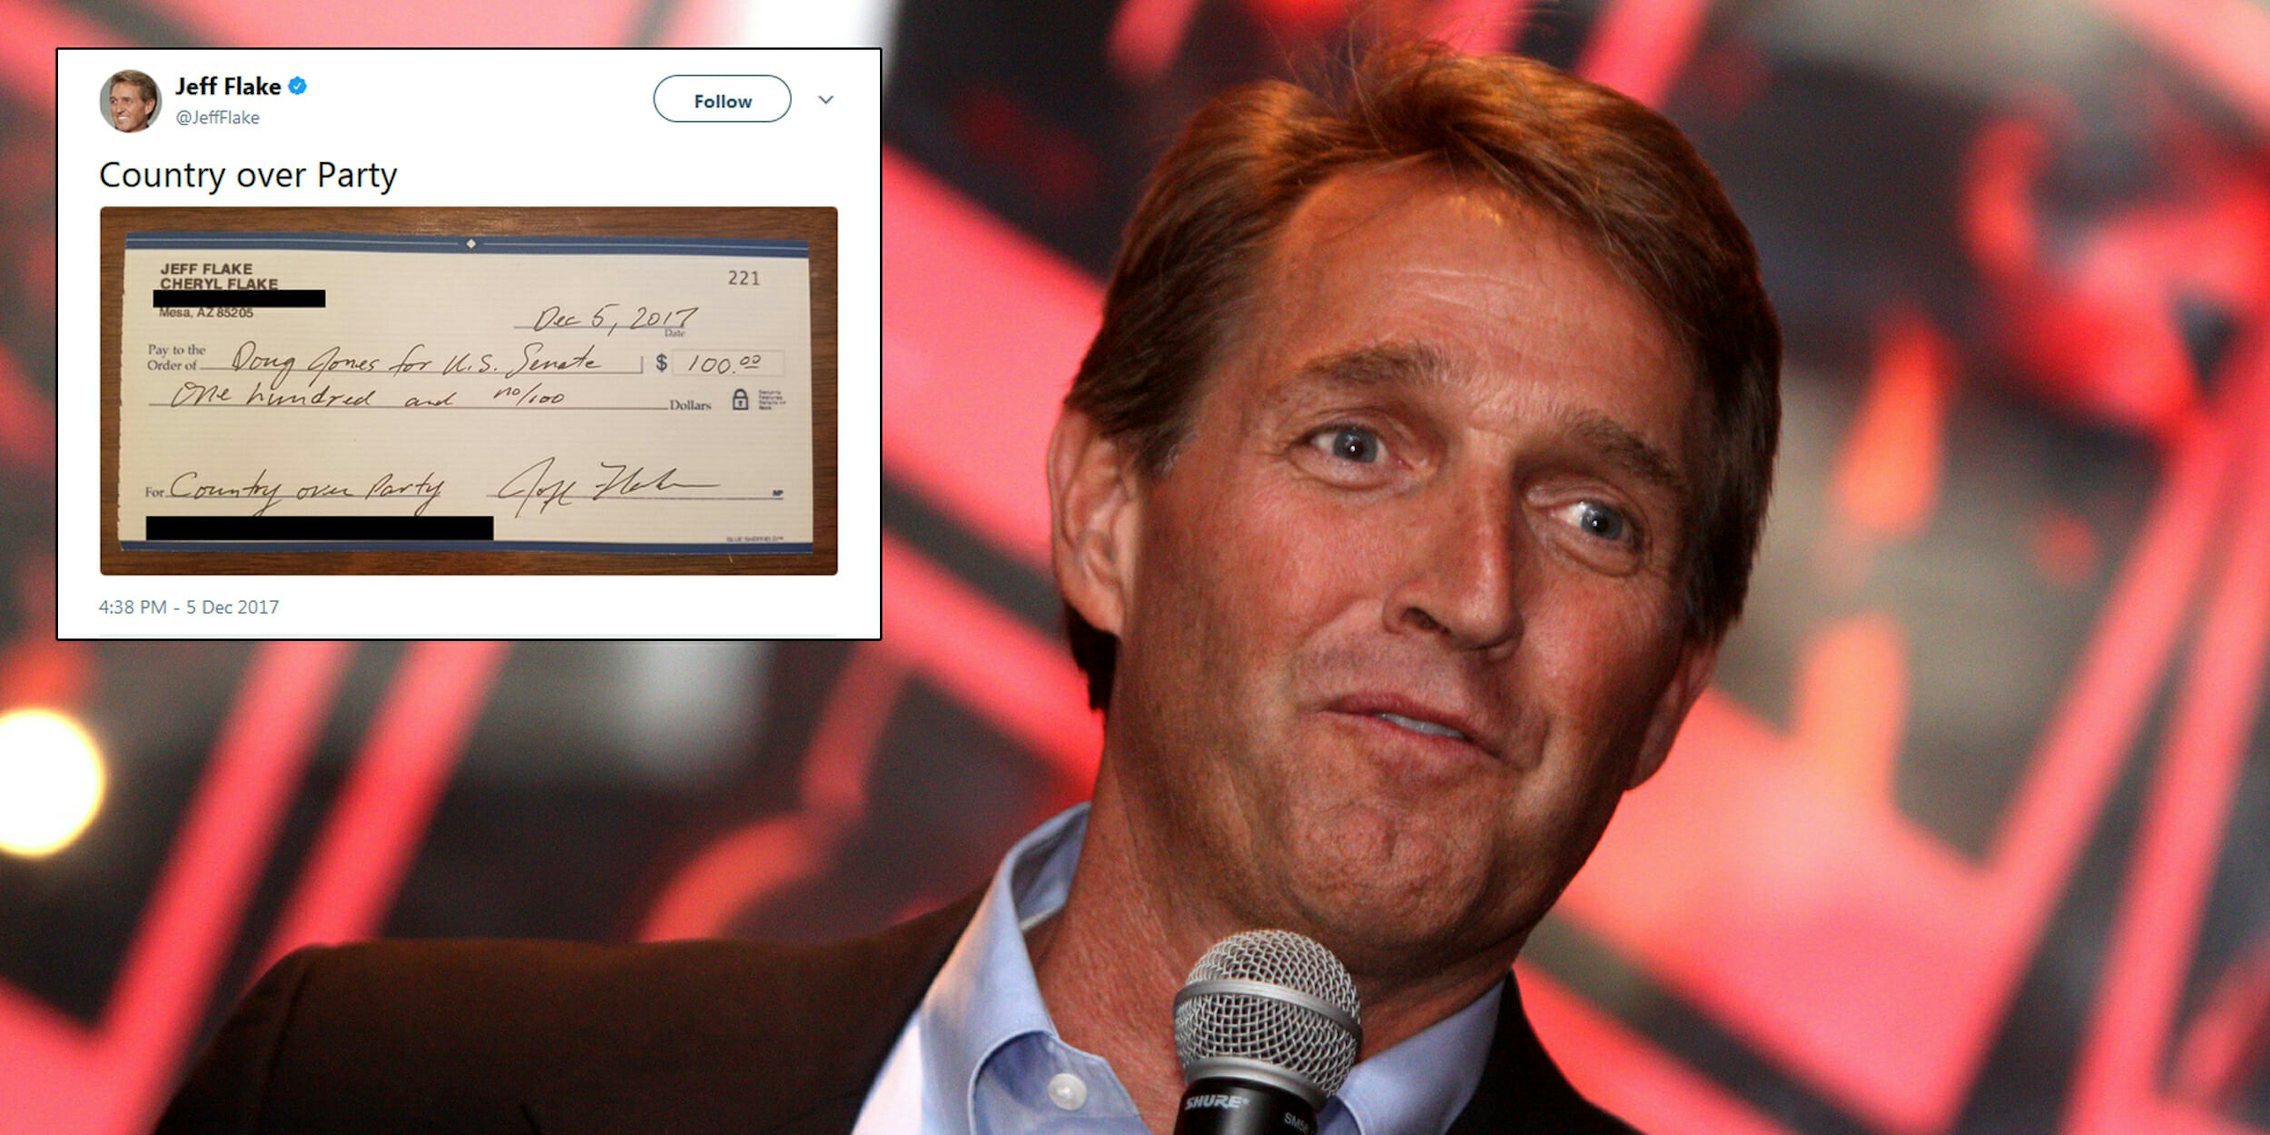 Sen. Jeff Flake (R-Ariz.) posed a $100 check that he is donating to Democrat Doug Jones in the Alabama Senate race later this month.